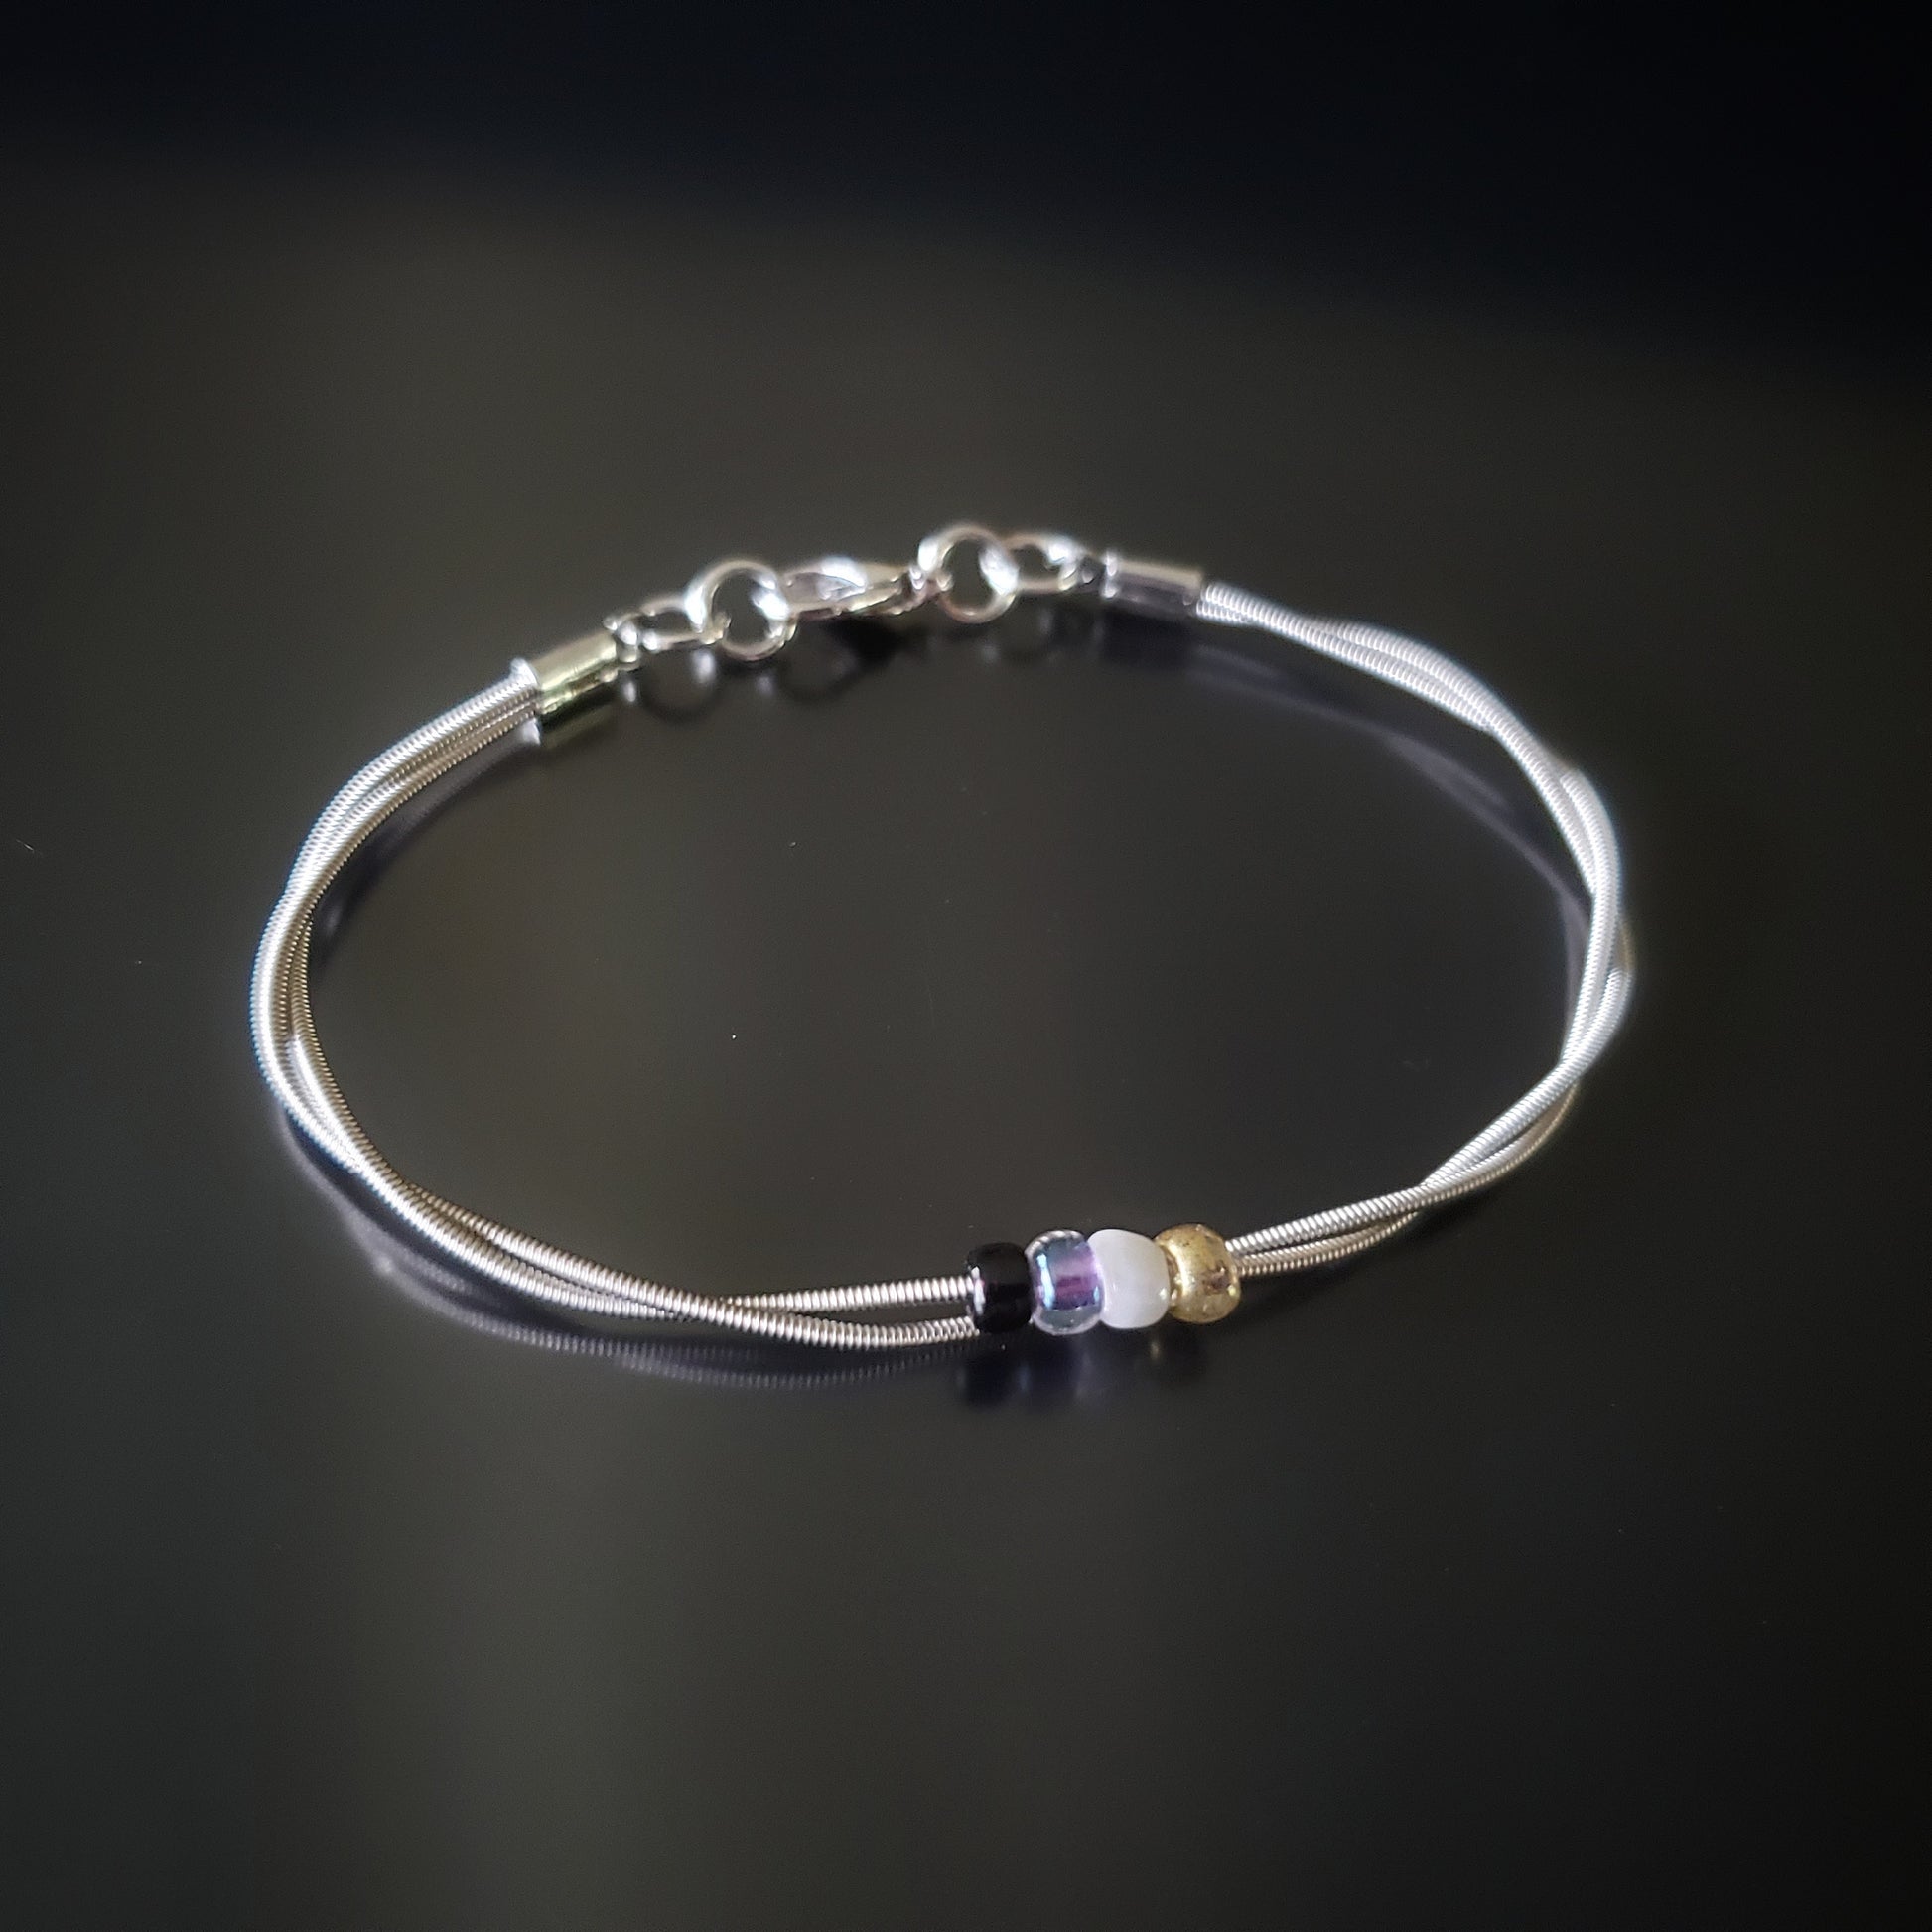 silver coloures clasp style bracelet with 4 glass beads representing the non-binary flag (yellow, white, purple & black) 